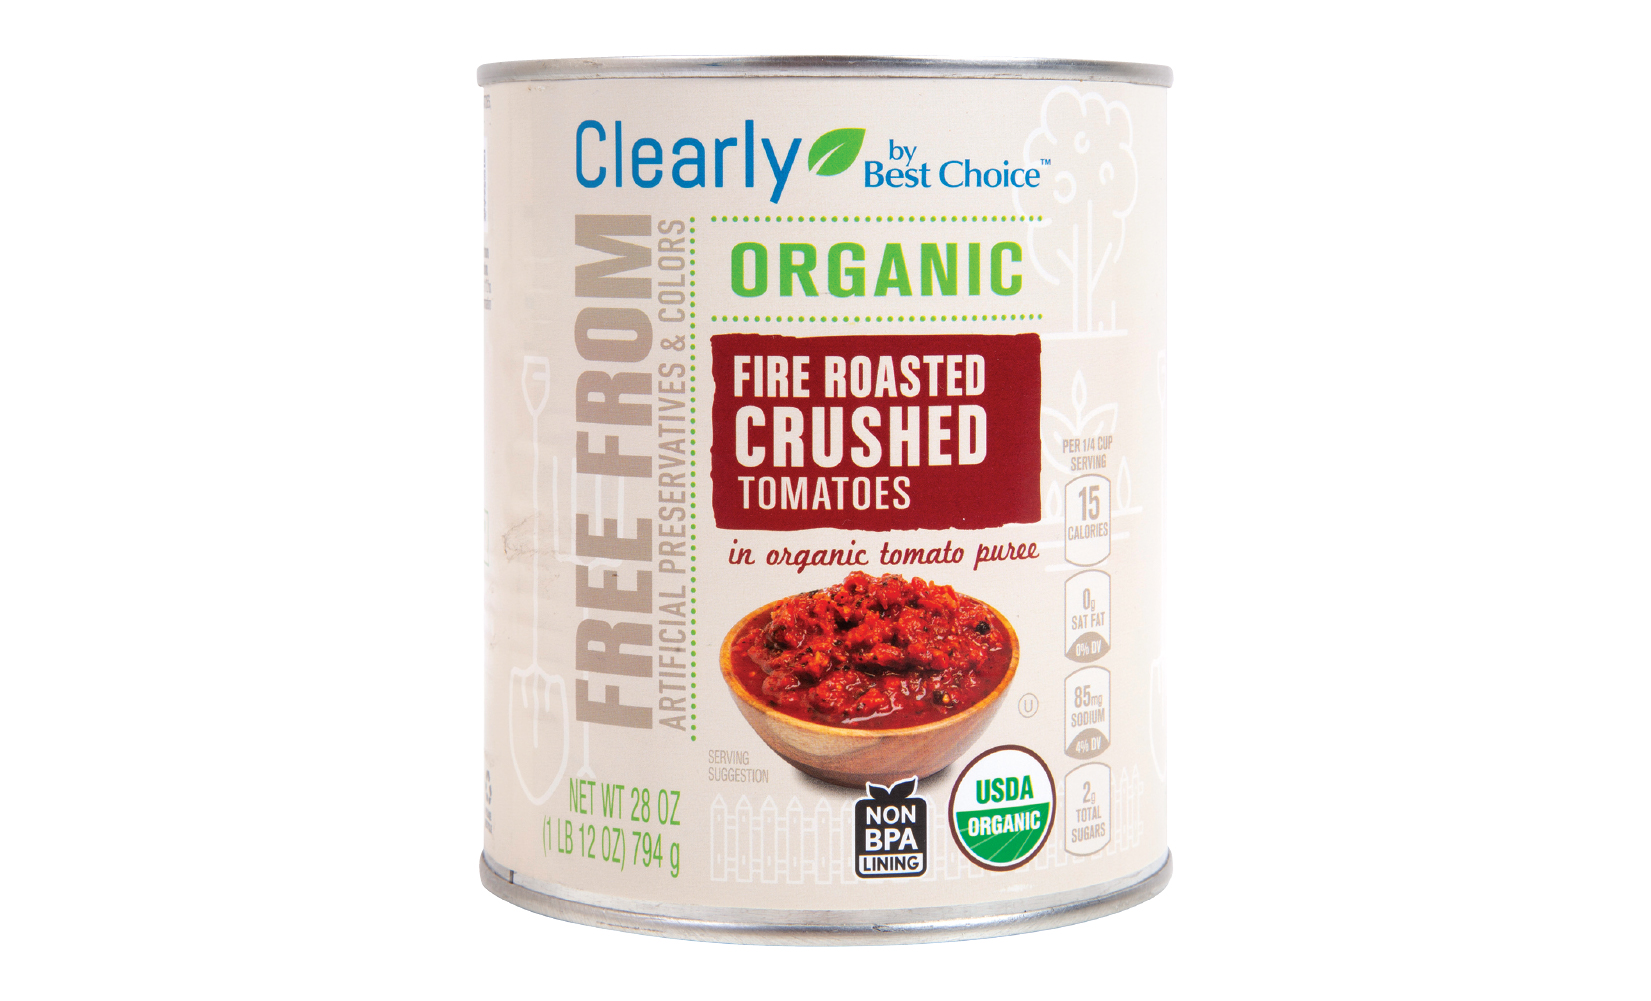 Fire Roasted Crushed Tomatoes